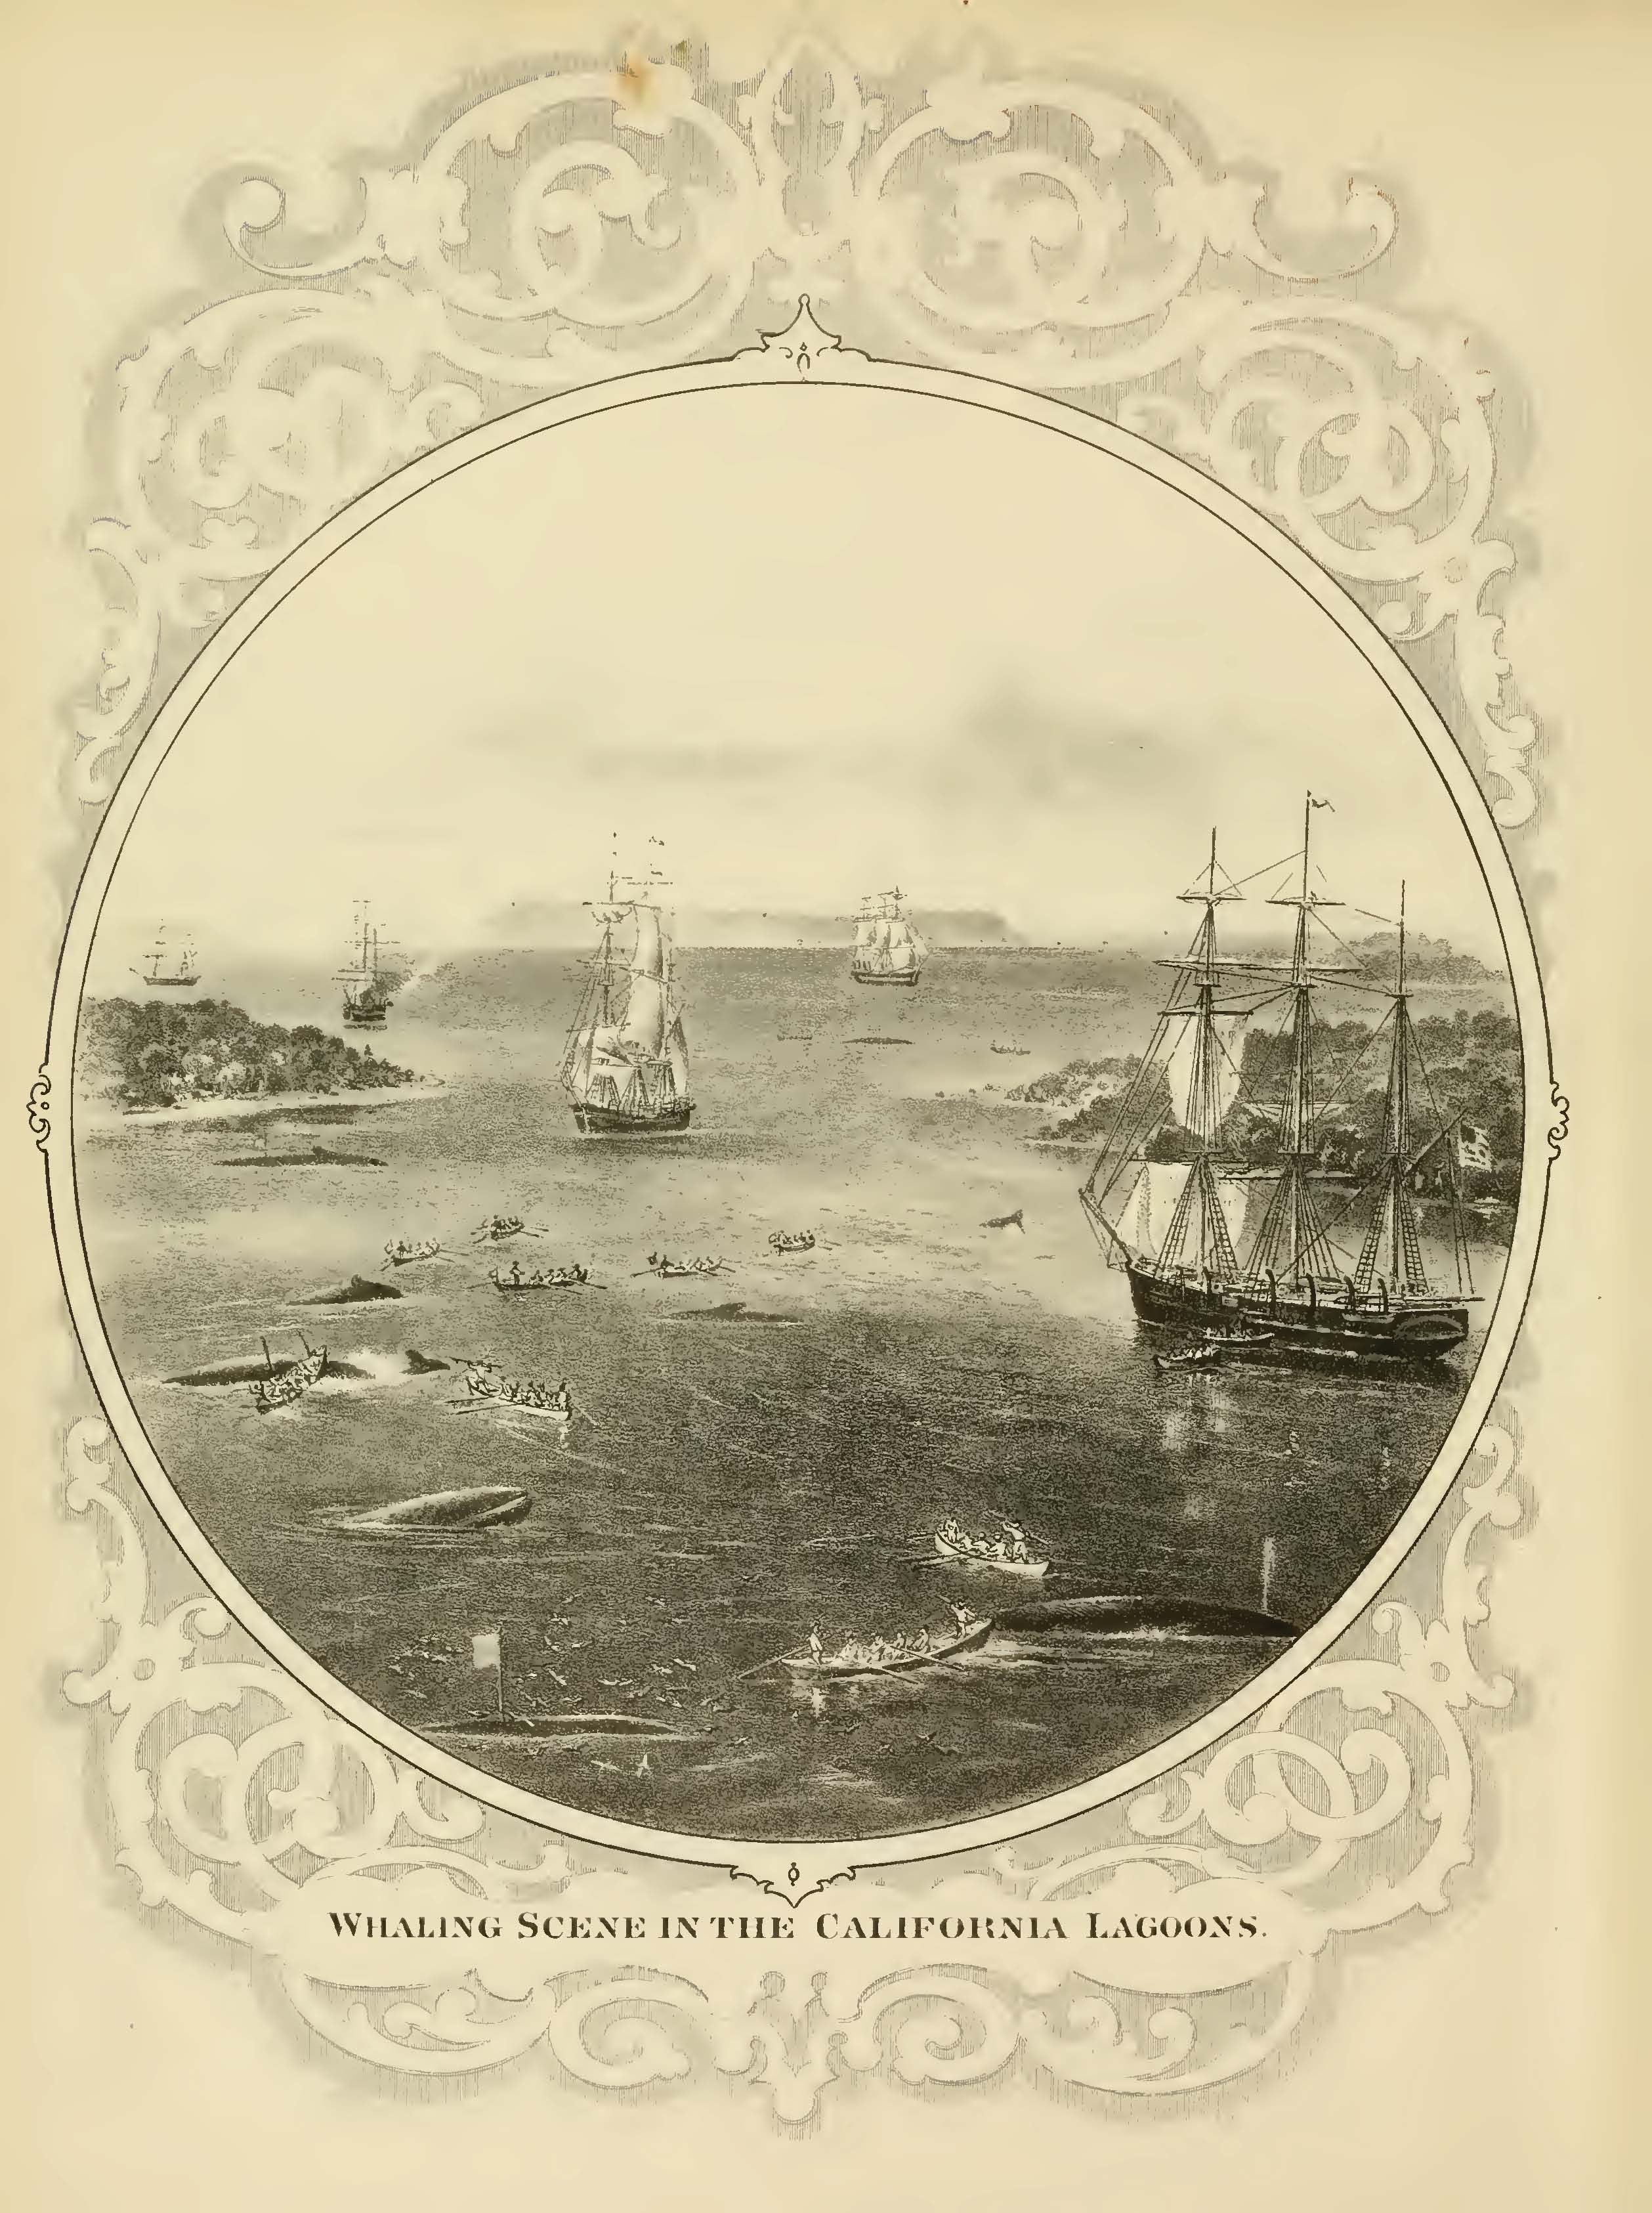 Scammon - Whaling Scene in the California Lagoons